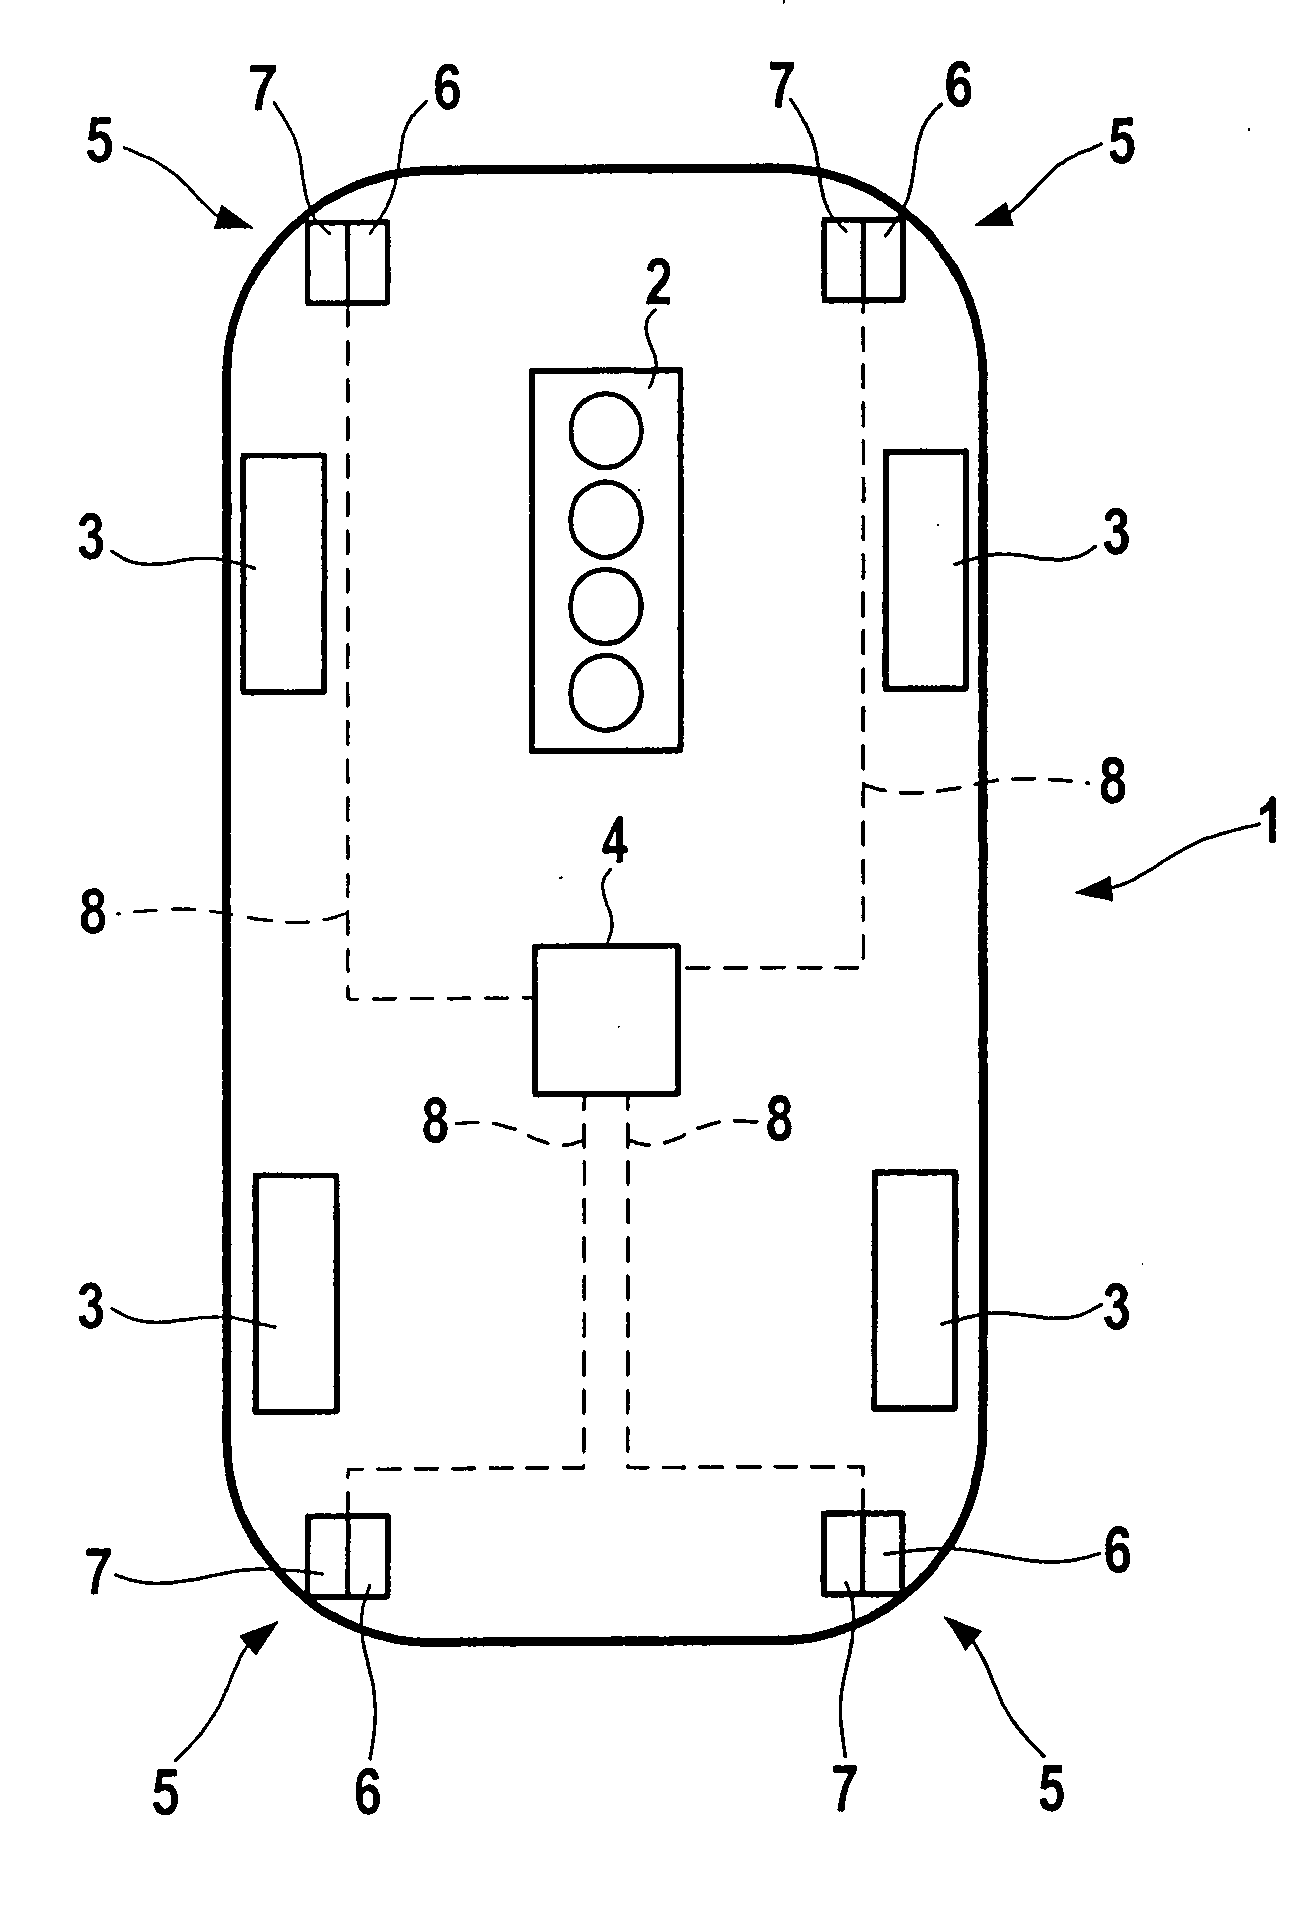 Method for diagnosing an internal combustion engine in a motor vehicle